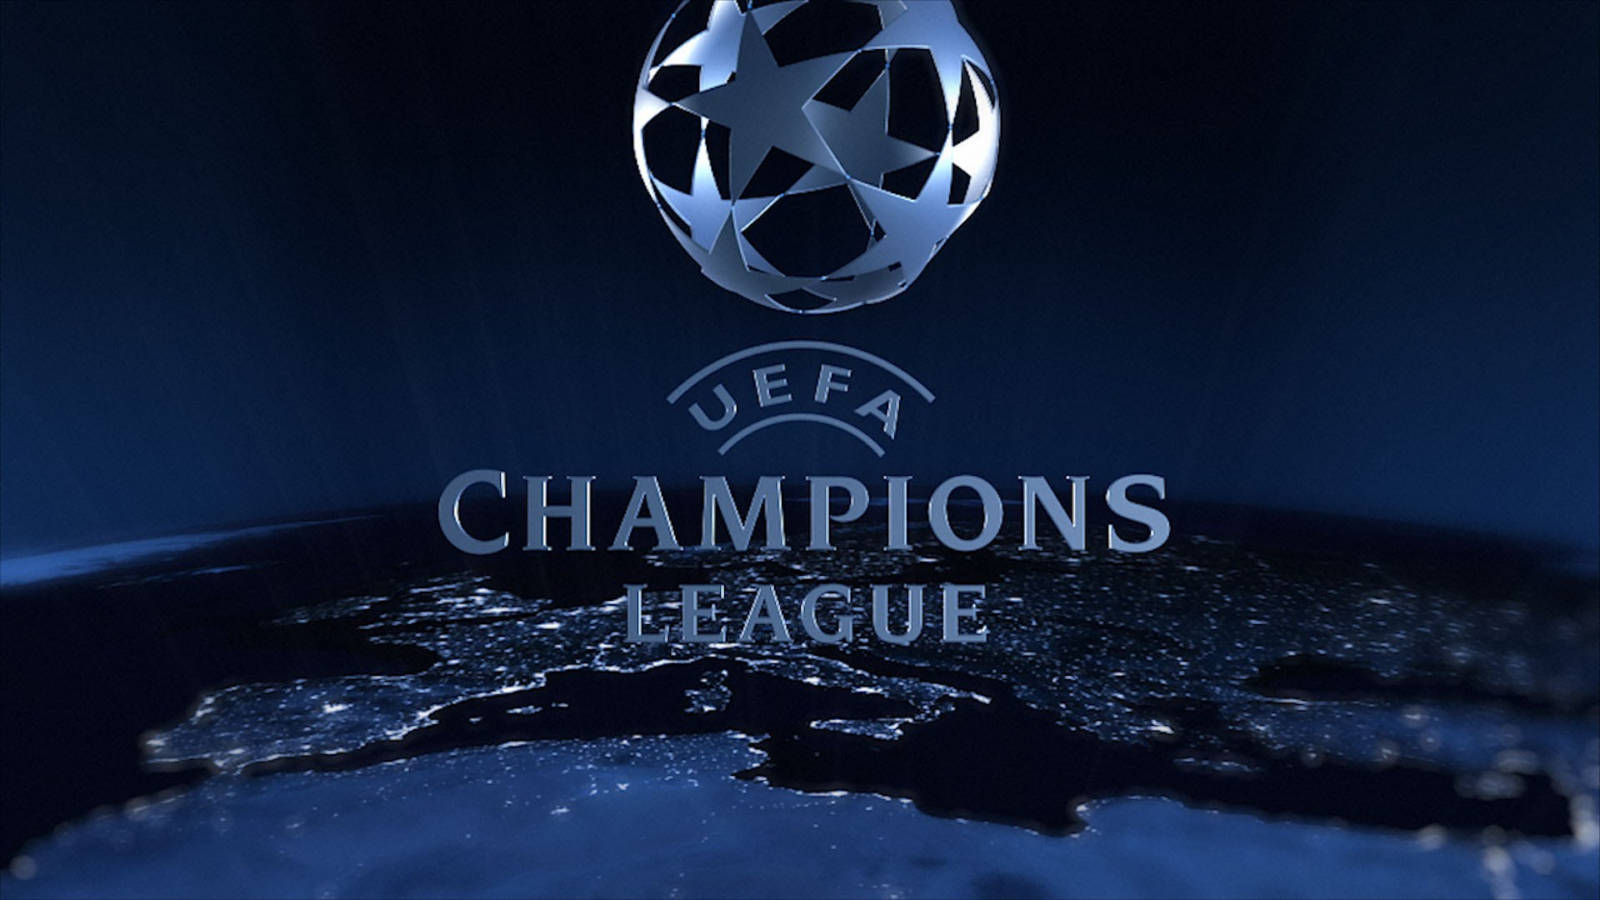 Uefa Champions League Competition Club Background